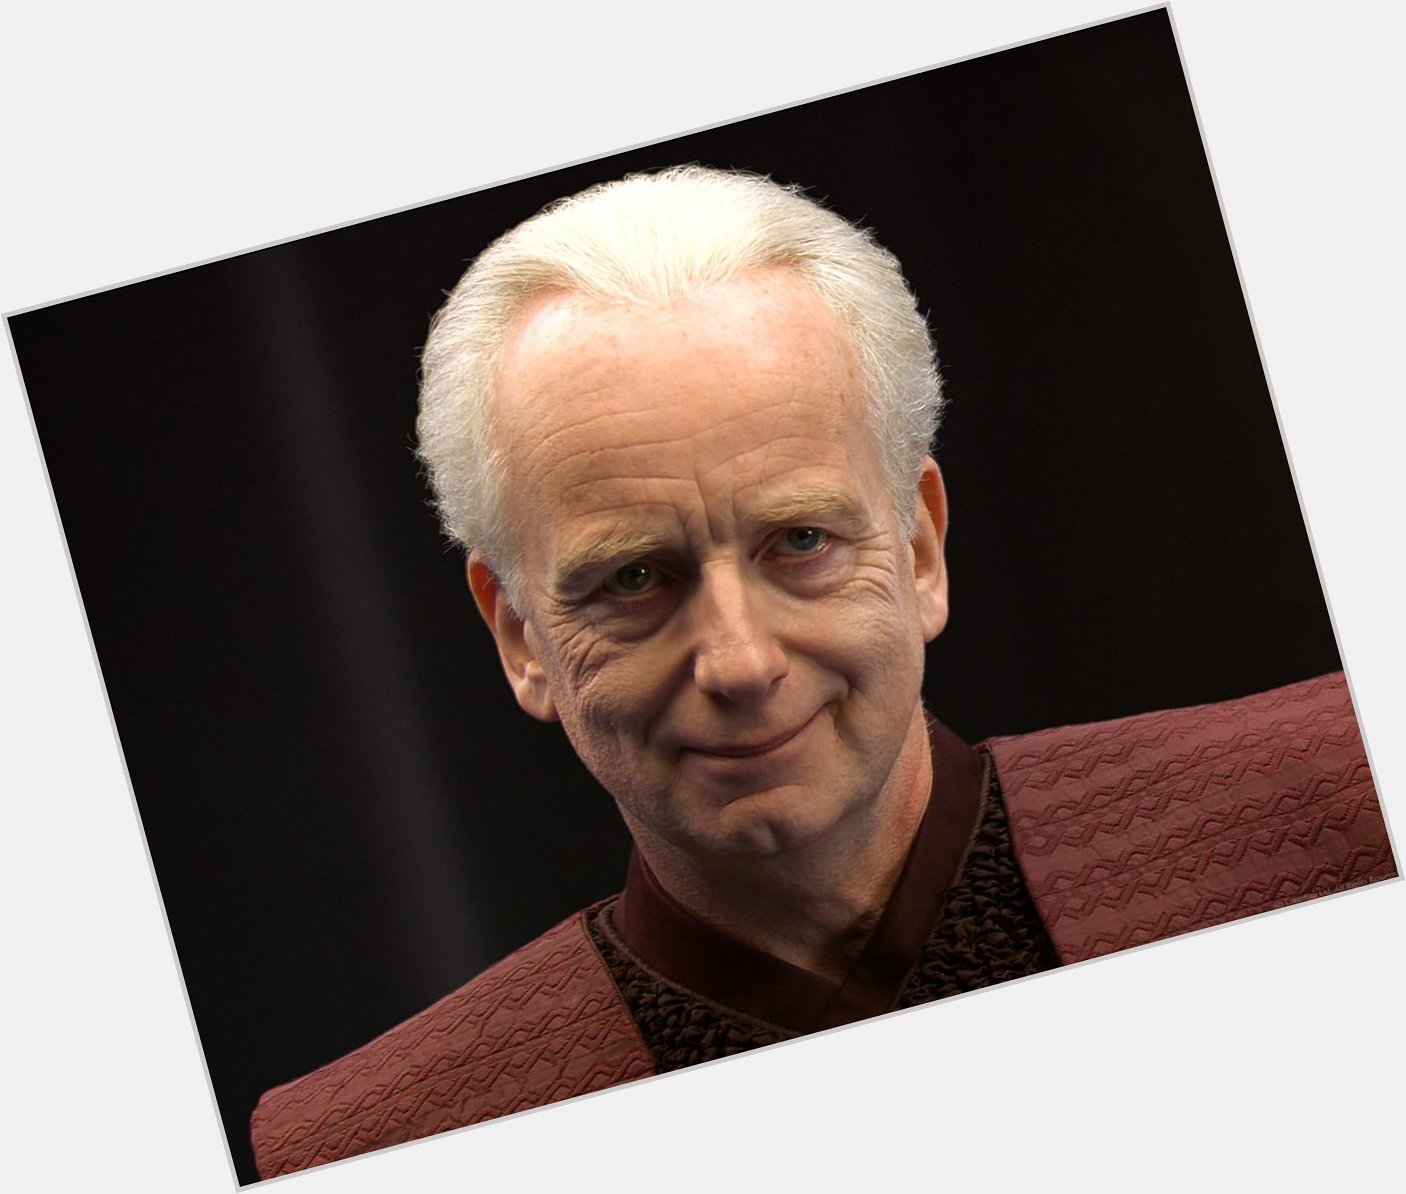 Happy Birthday, Mister Ian McDiarmid. 
The dark side of the Force be with you always 